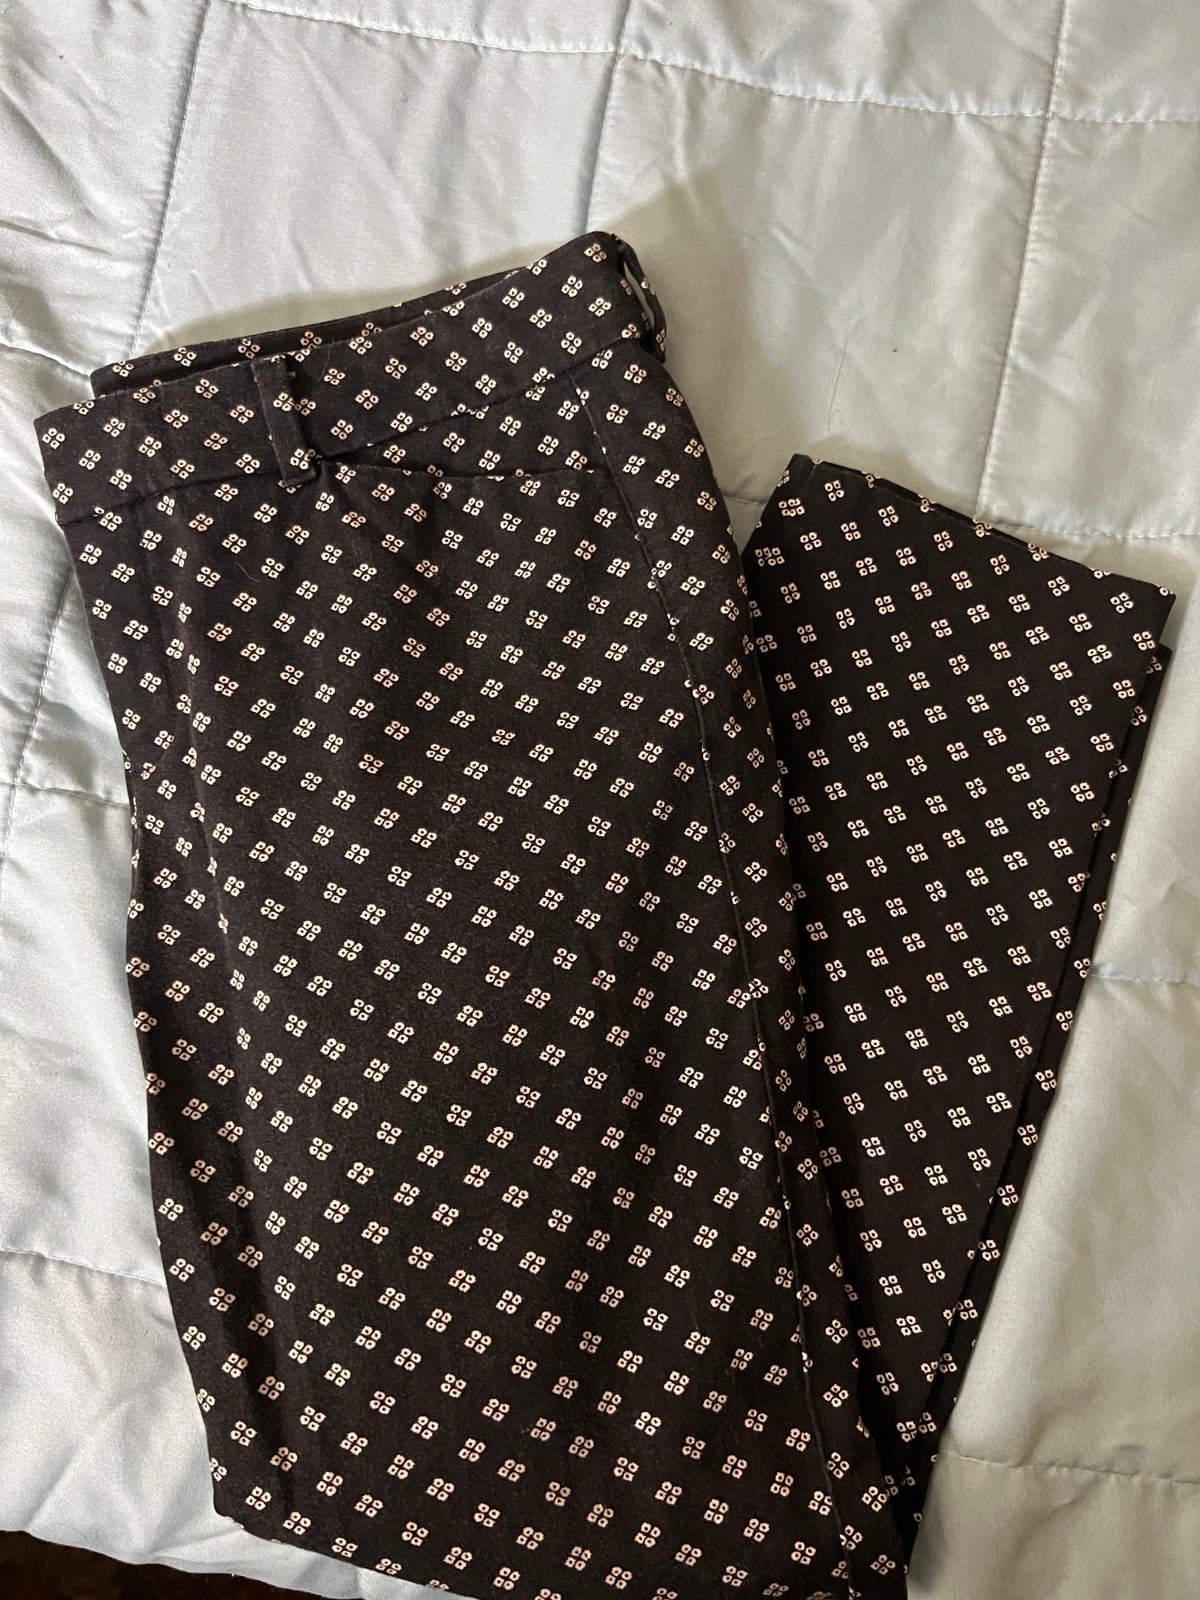 where to buy  Old Navy Pixie Pants Pee7KNO8D just buy it